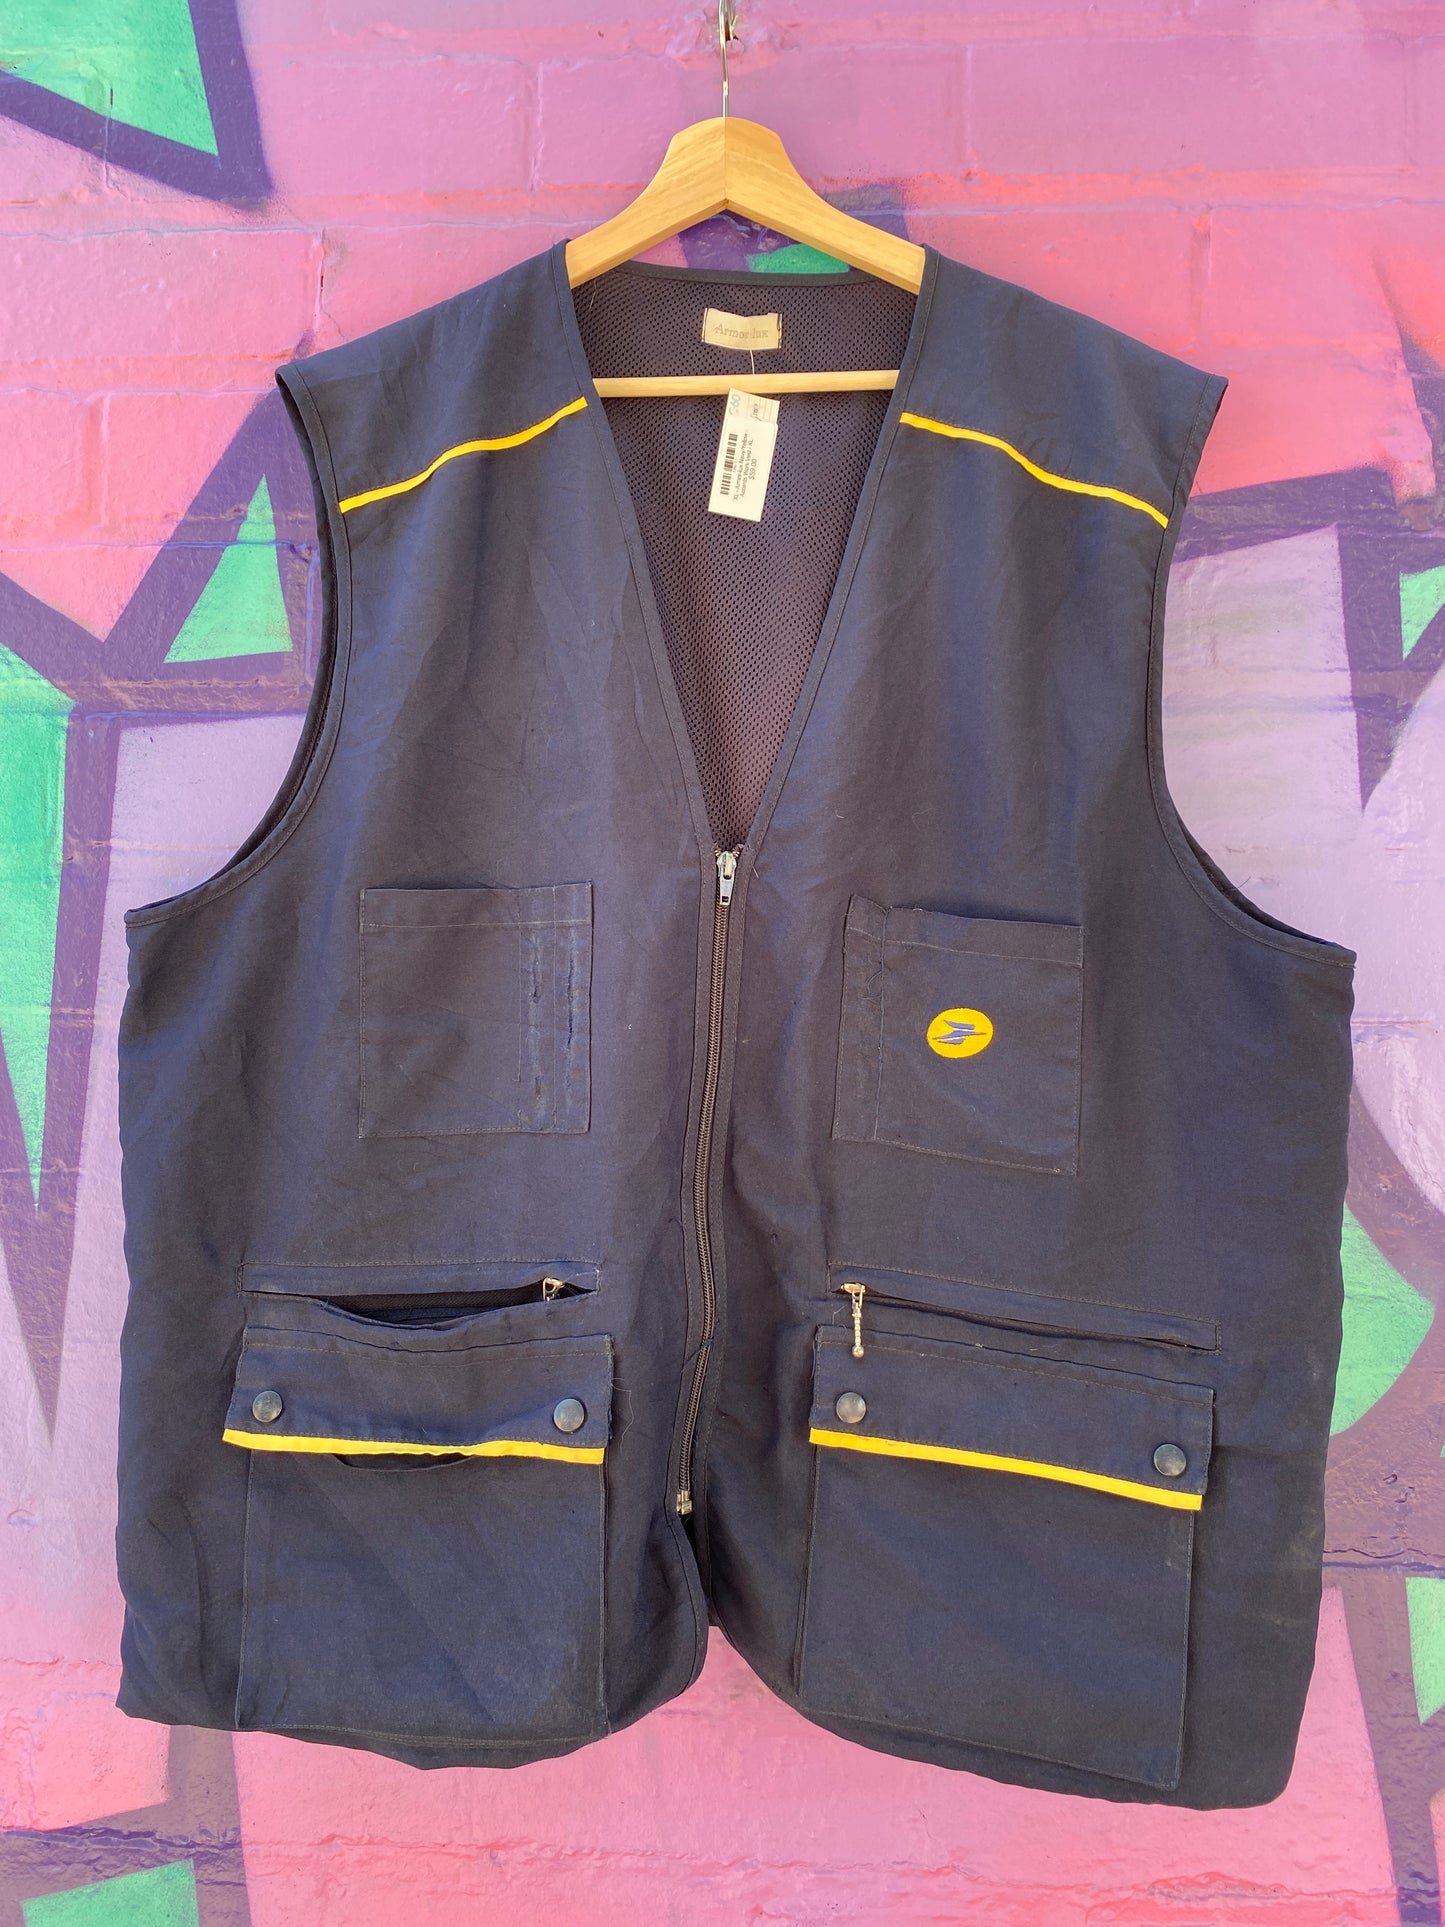 XL - Armor-lux Navy/Yellow Accents Work Vest